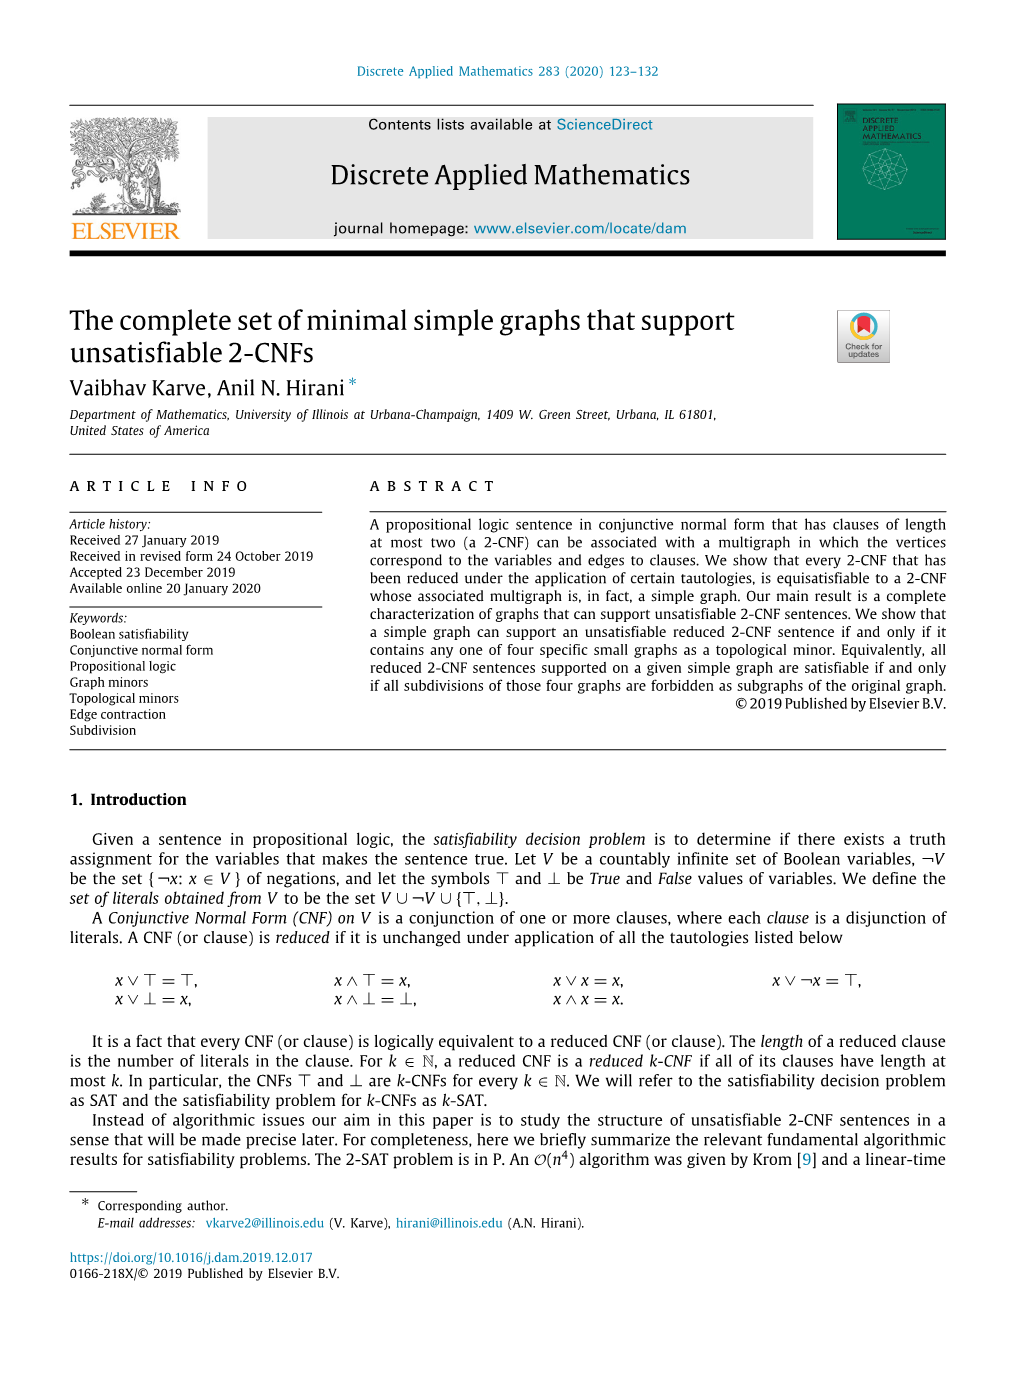 The Complete Set of Minimal Simple Graphs That Support Unsatisfiable 2-Cnfs ∗ Vaibhav Karve, Anil N